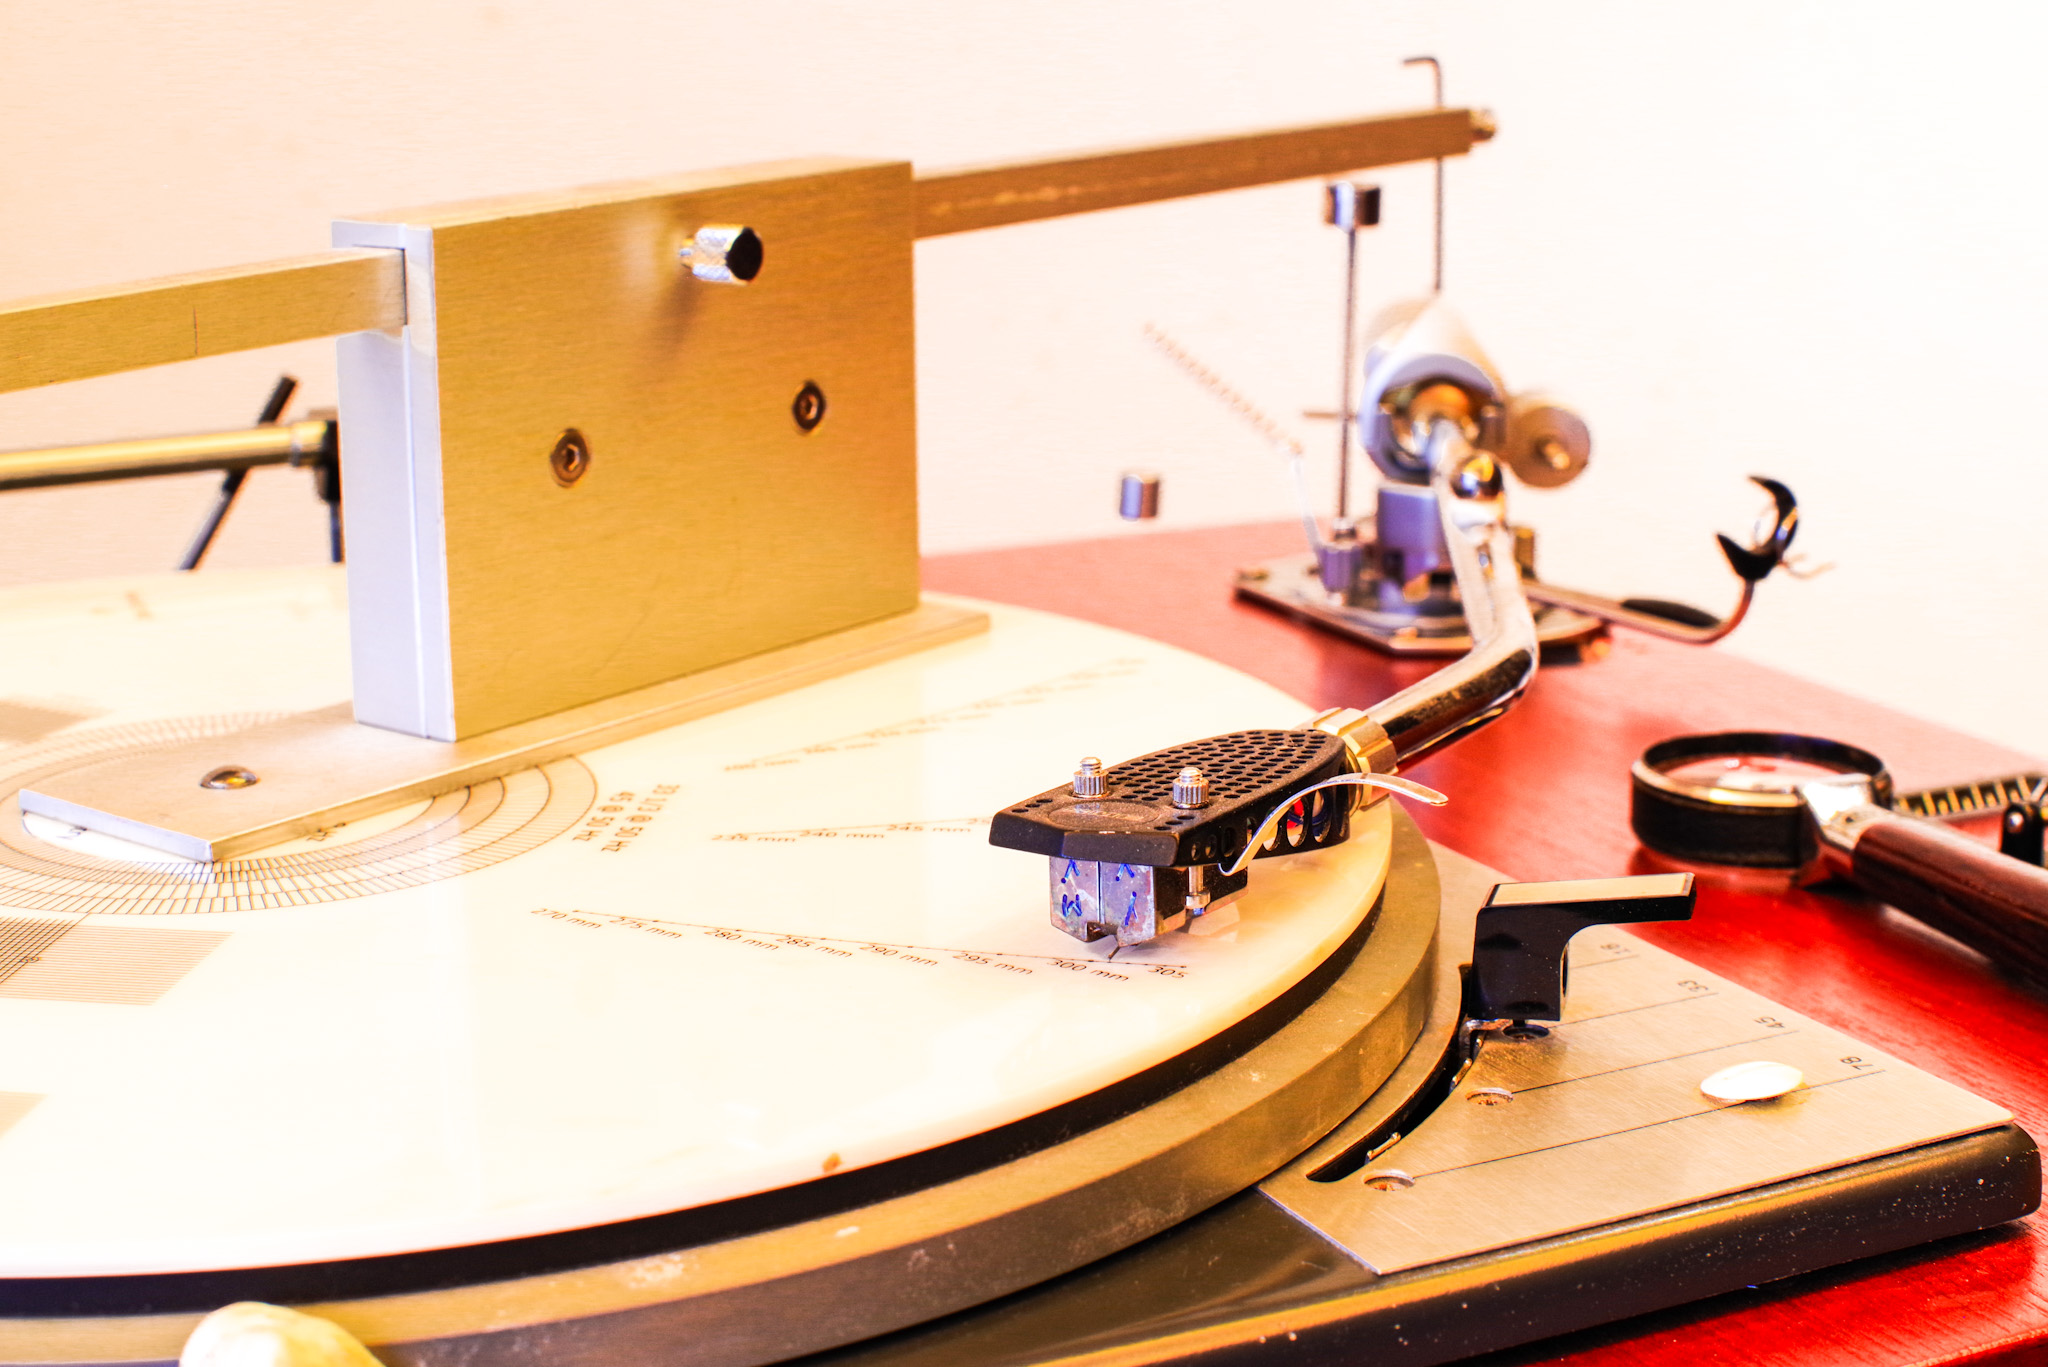 Showing measuring tonearm with a protractor sme3102